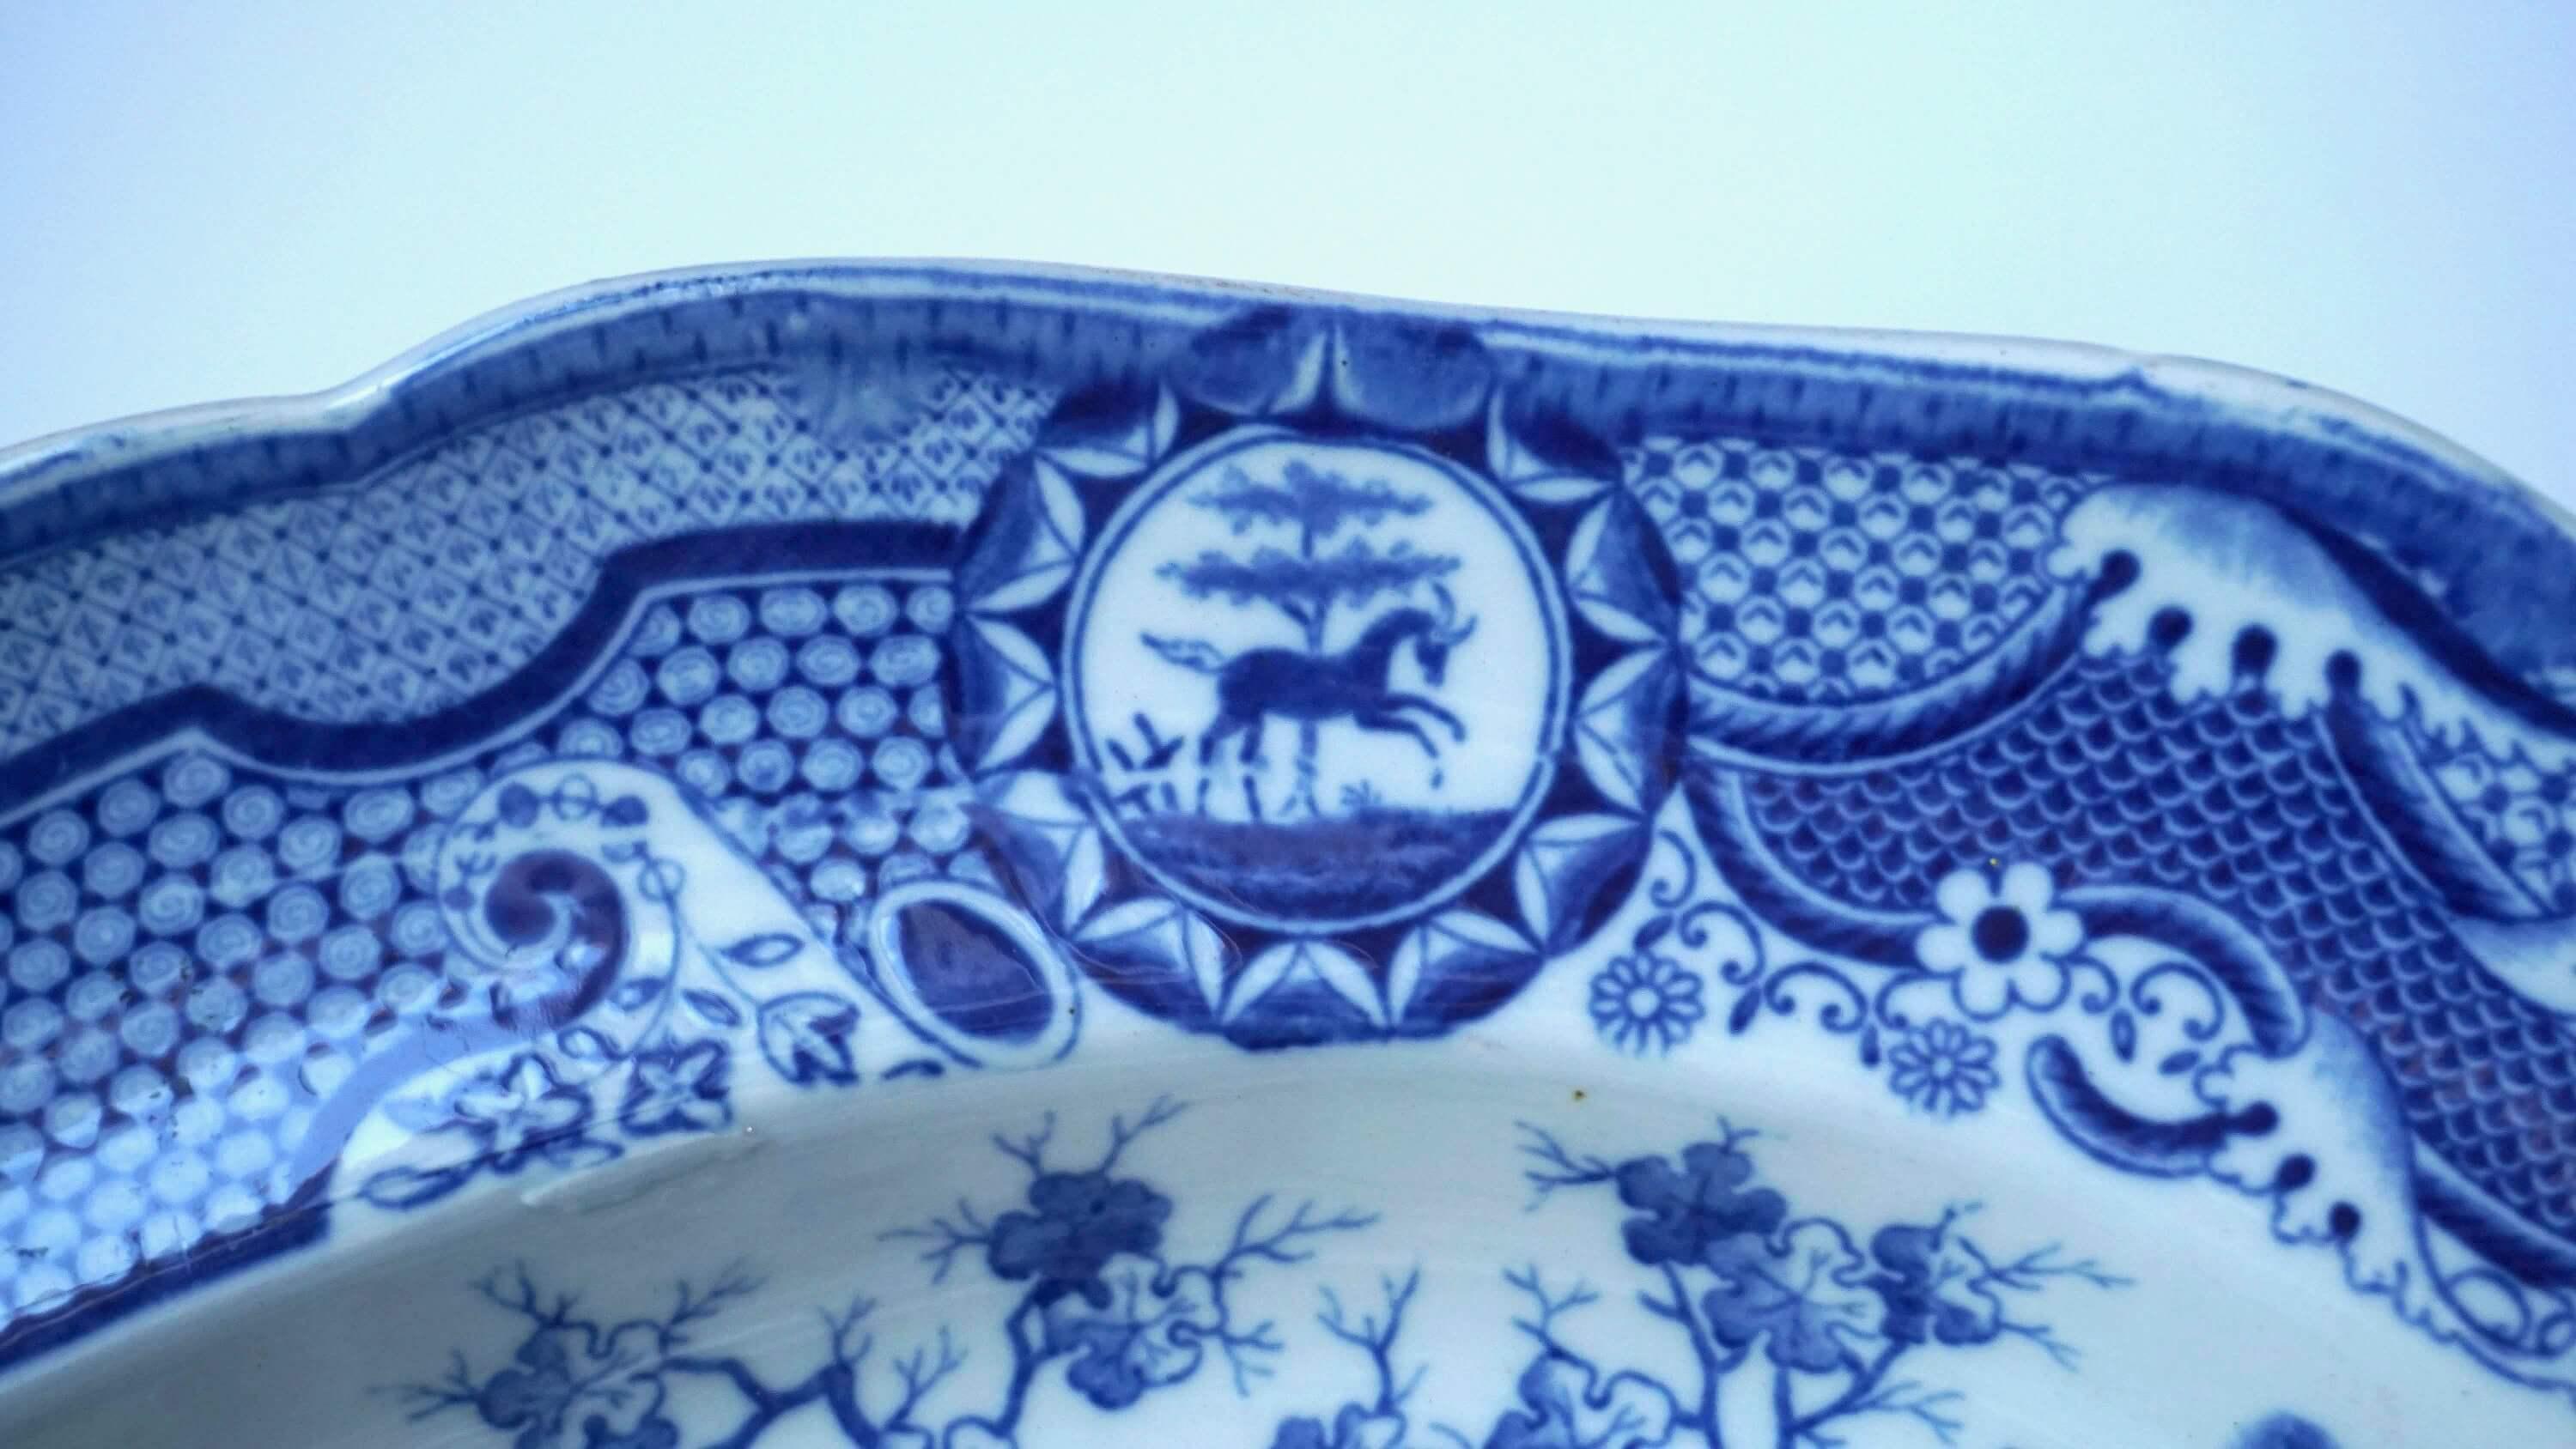 Ceramic Spode 'Gothic Castles' Large Blue and White Staffordshire Platter, circa 1815 For Sale